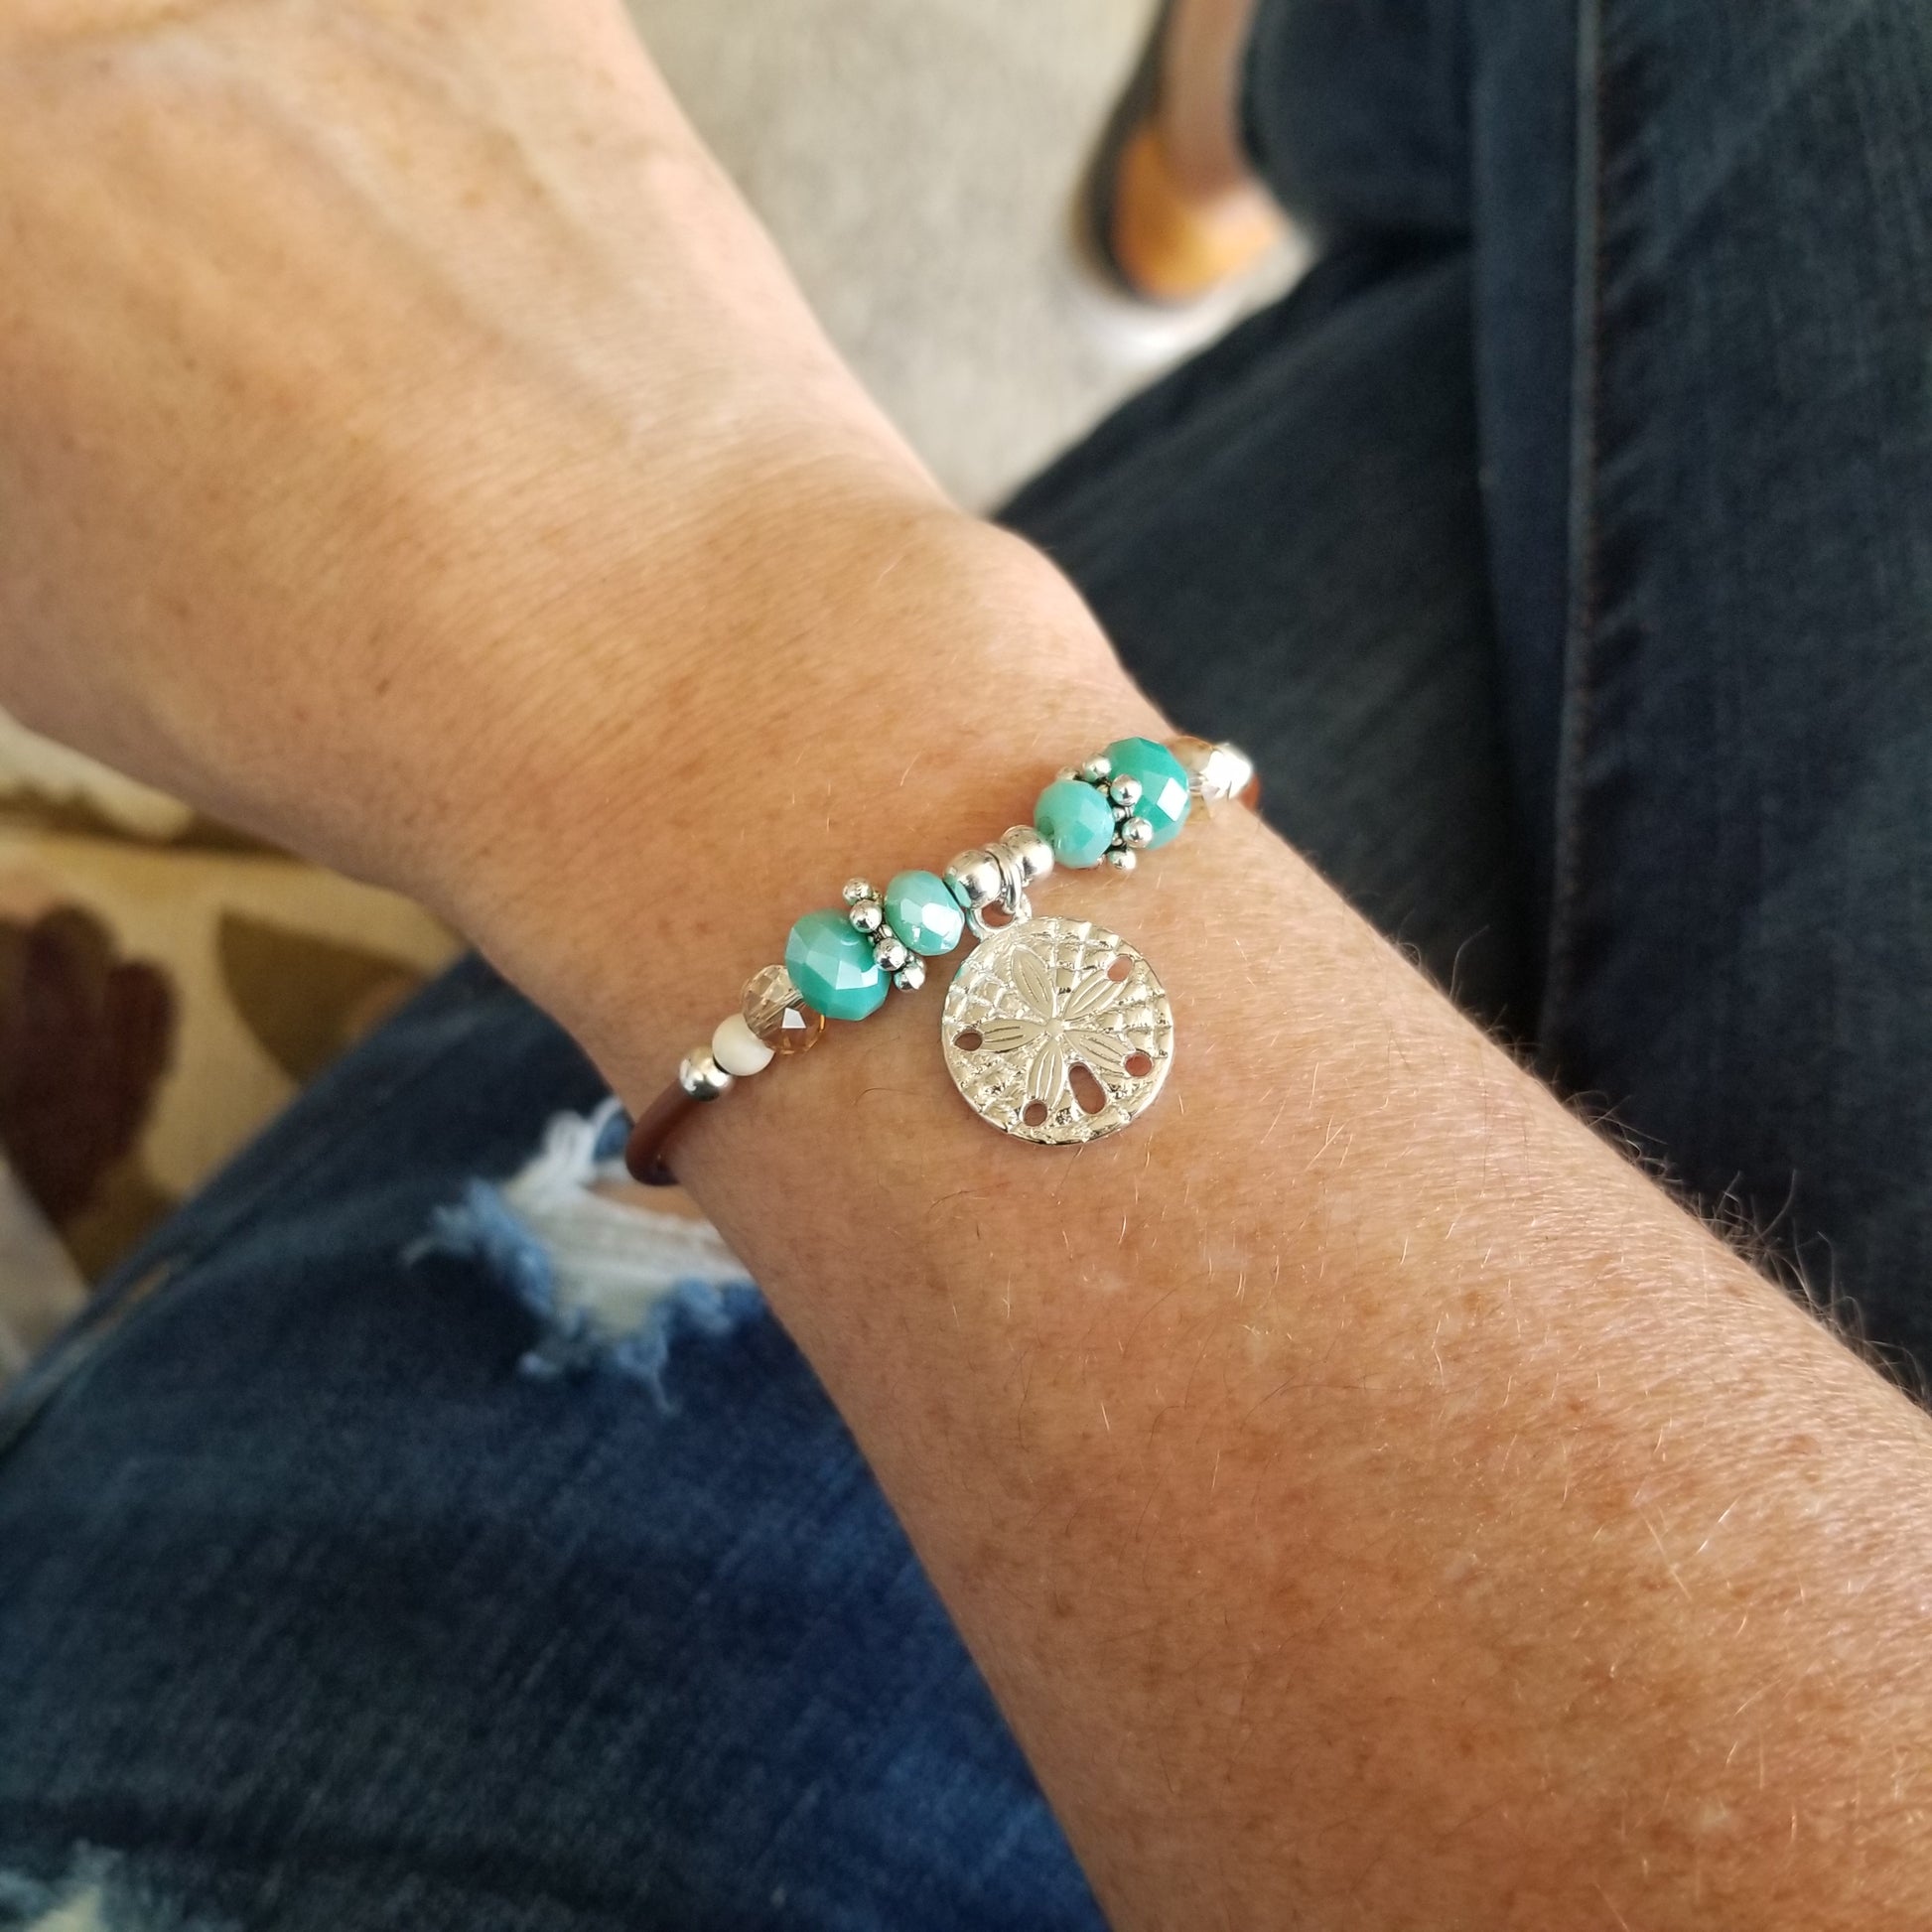 Wrap Bracelet - sand dollar pewter charm with mix aqua and sandy colored beads